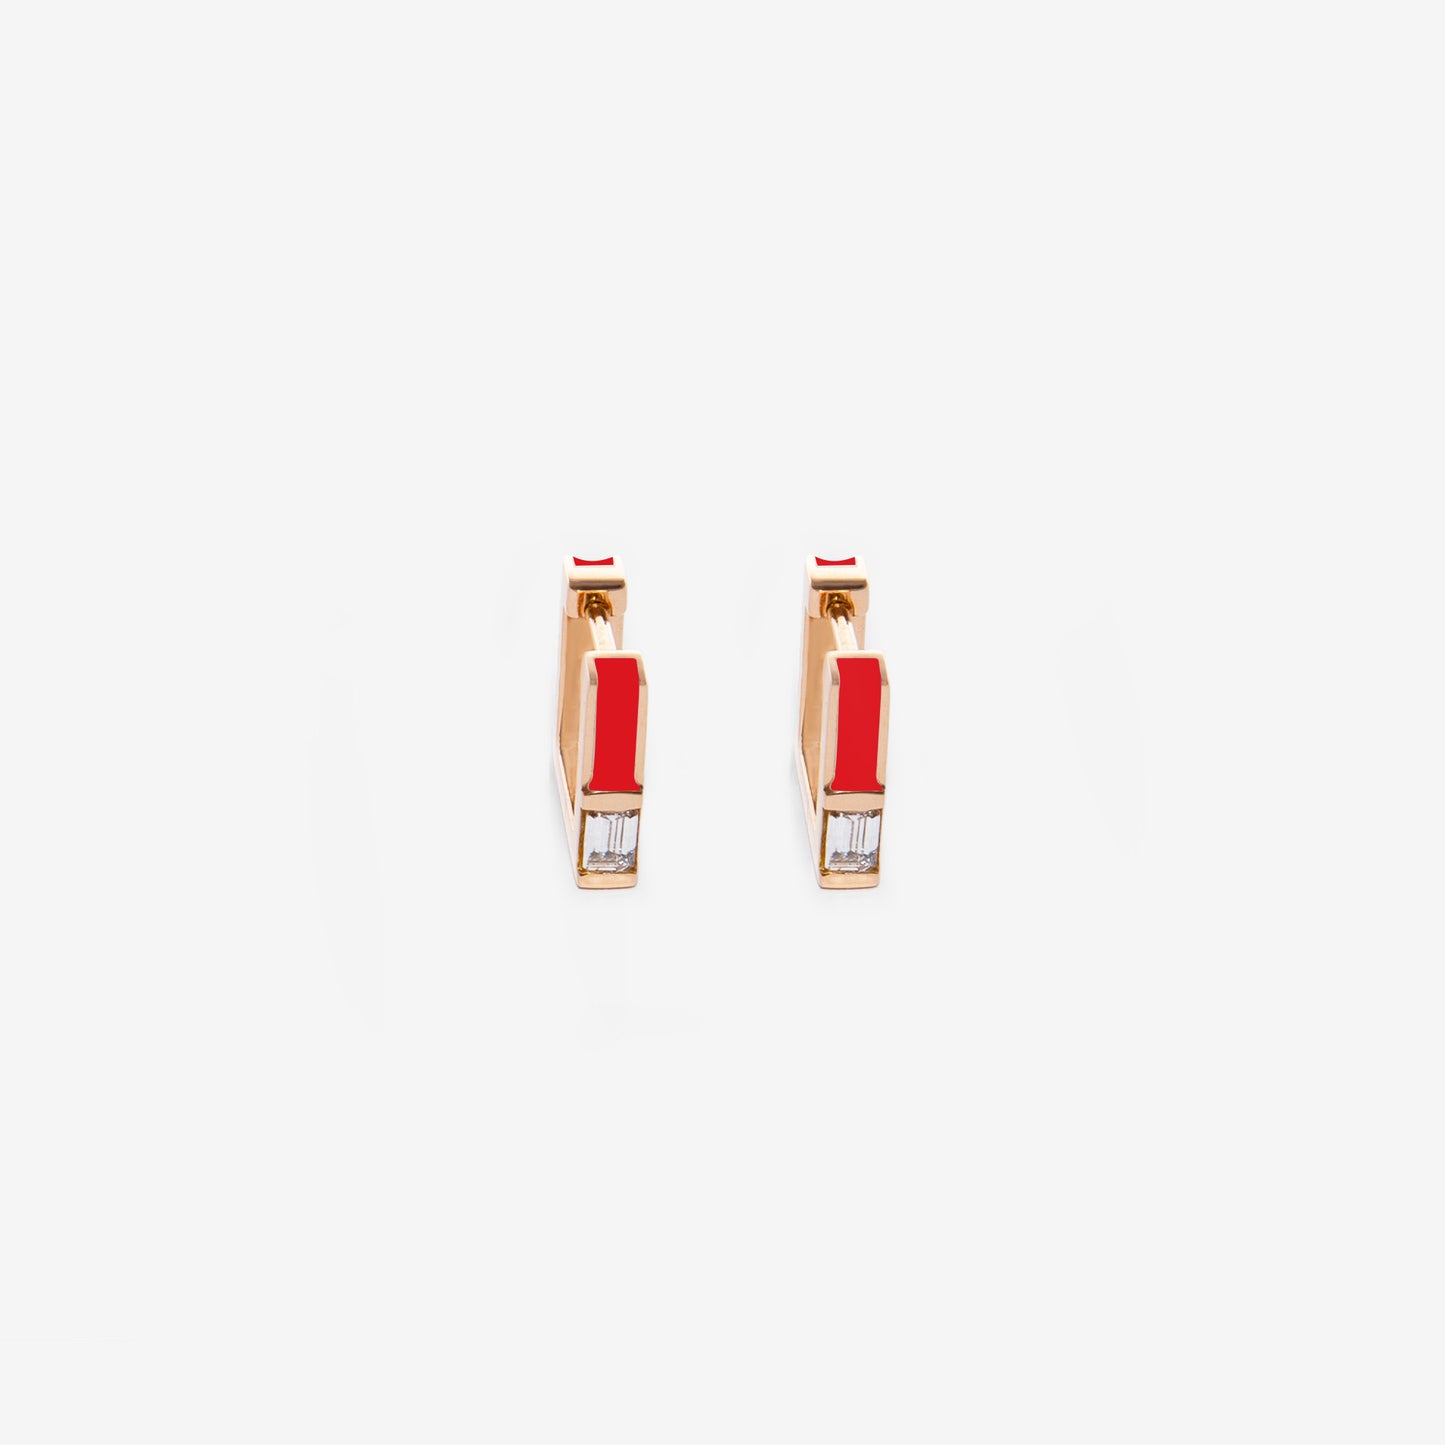 Square red earrings with diamonds